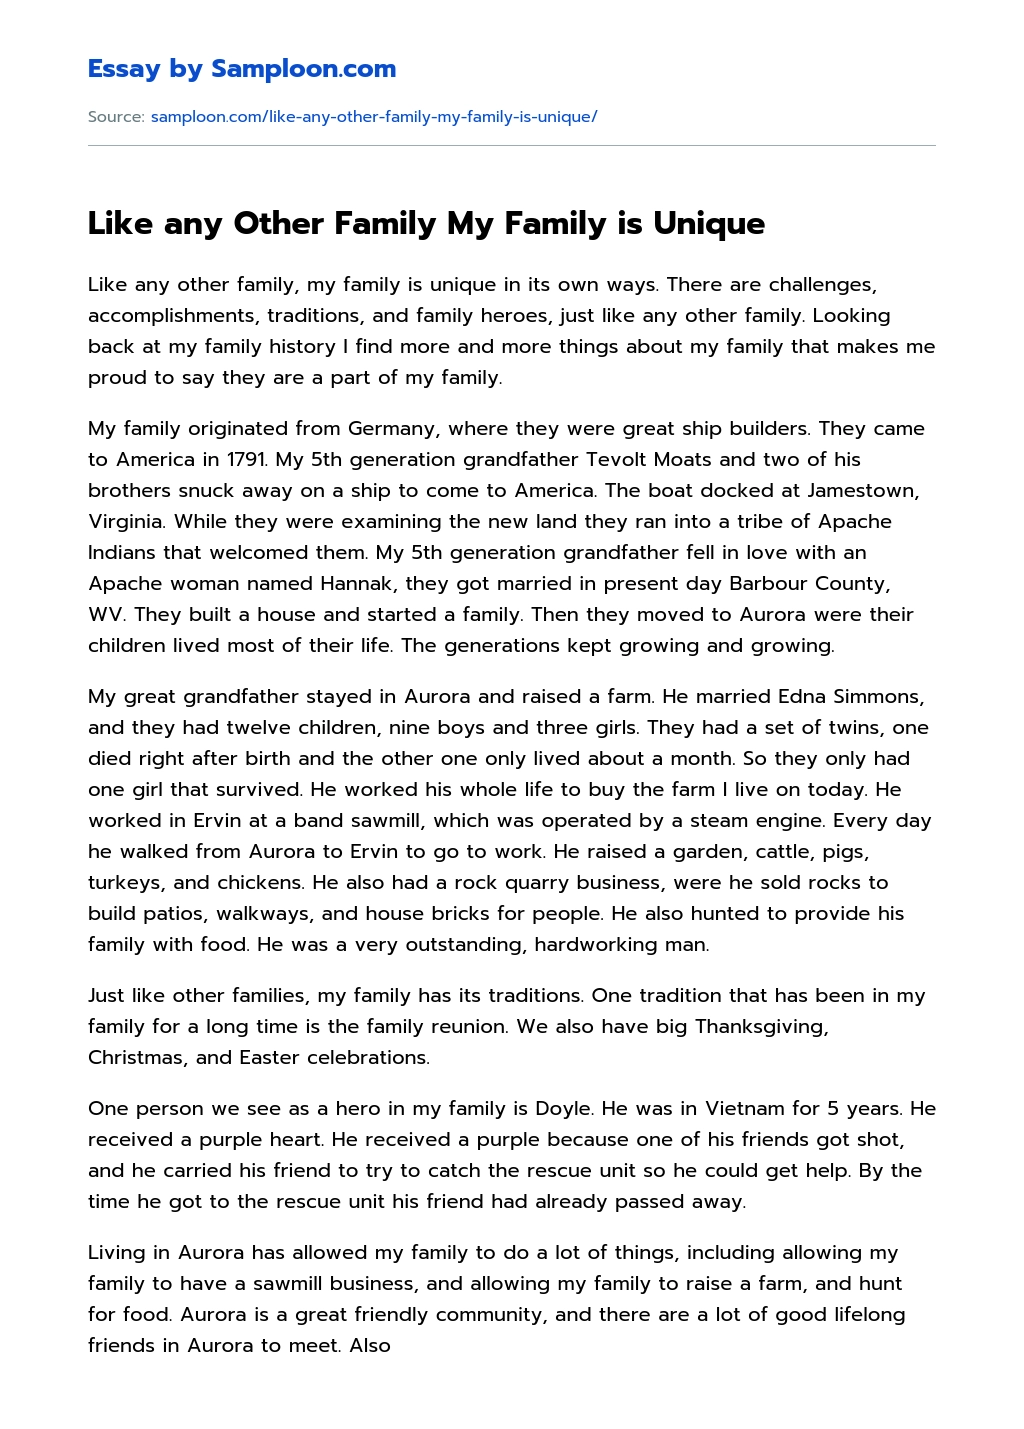 Like any Other Family My Family is Unique essay